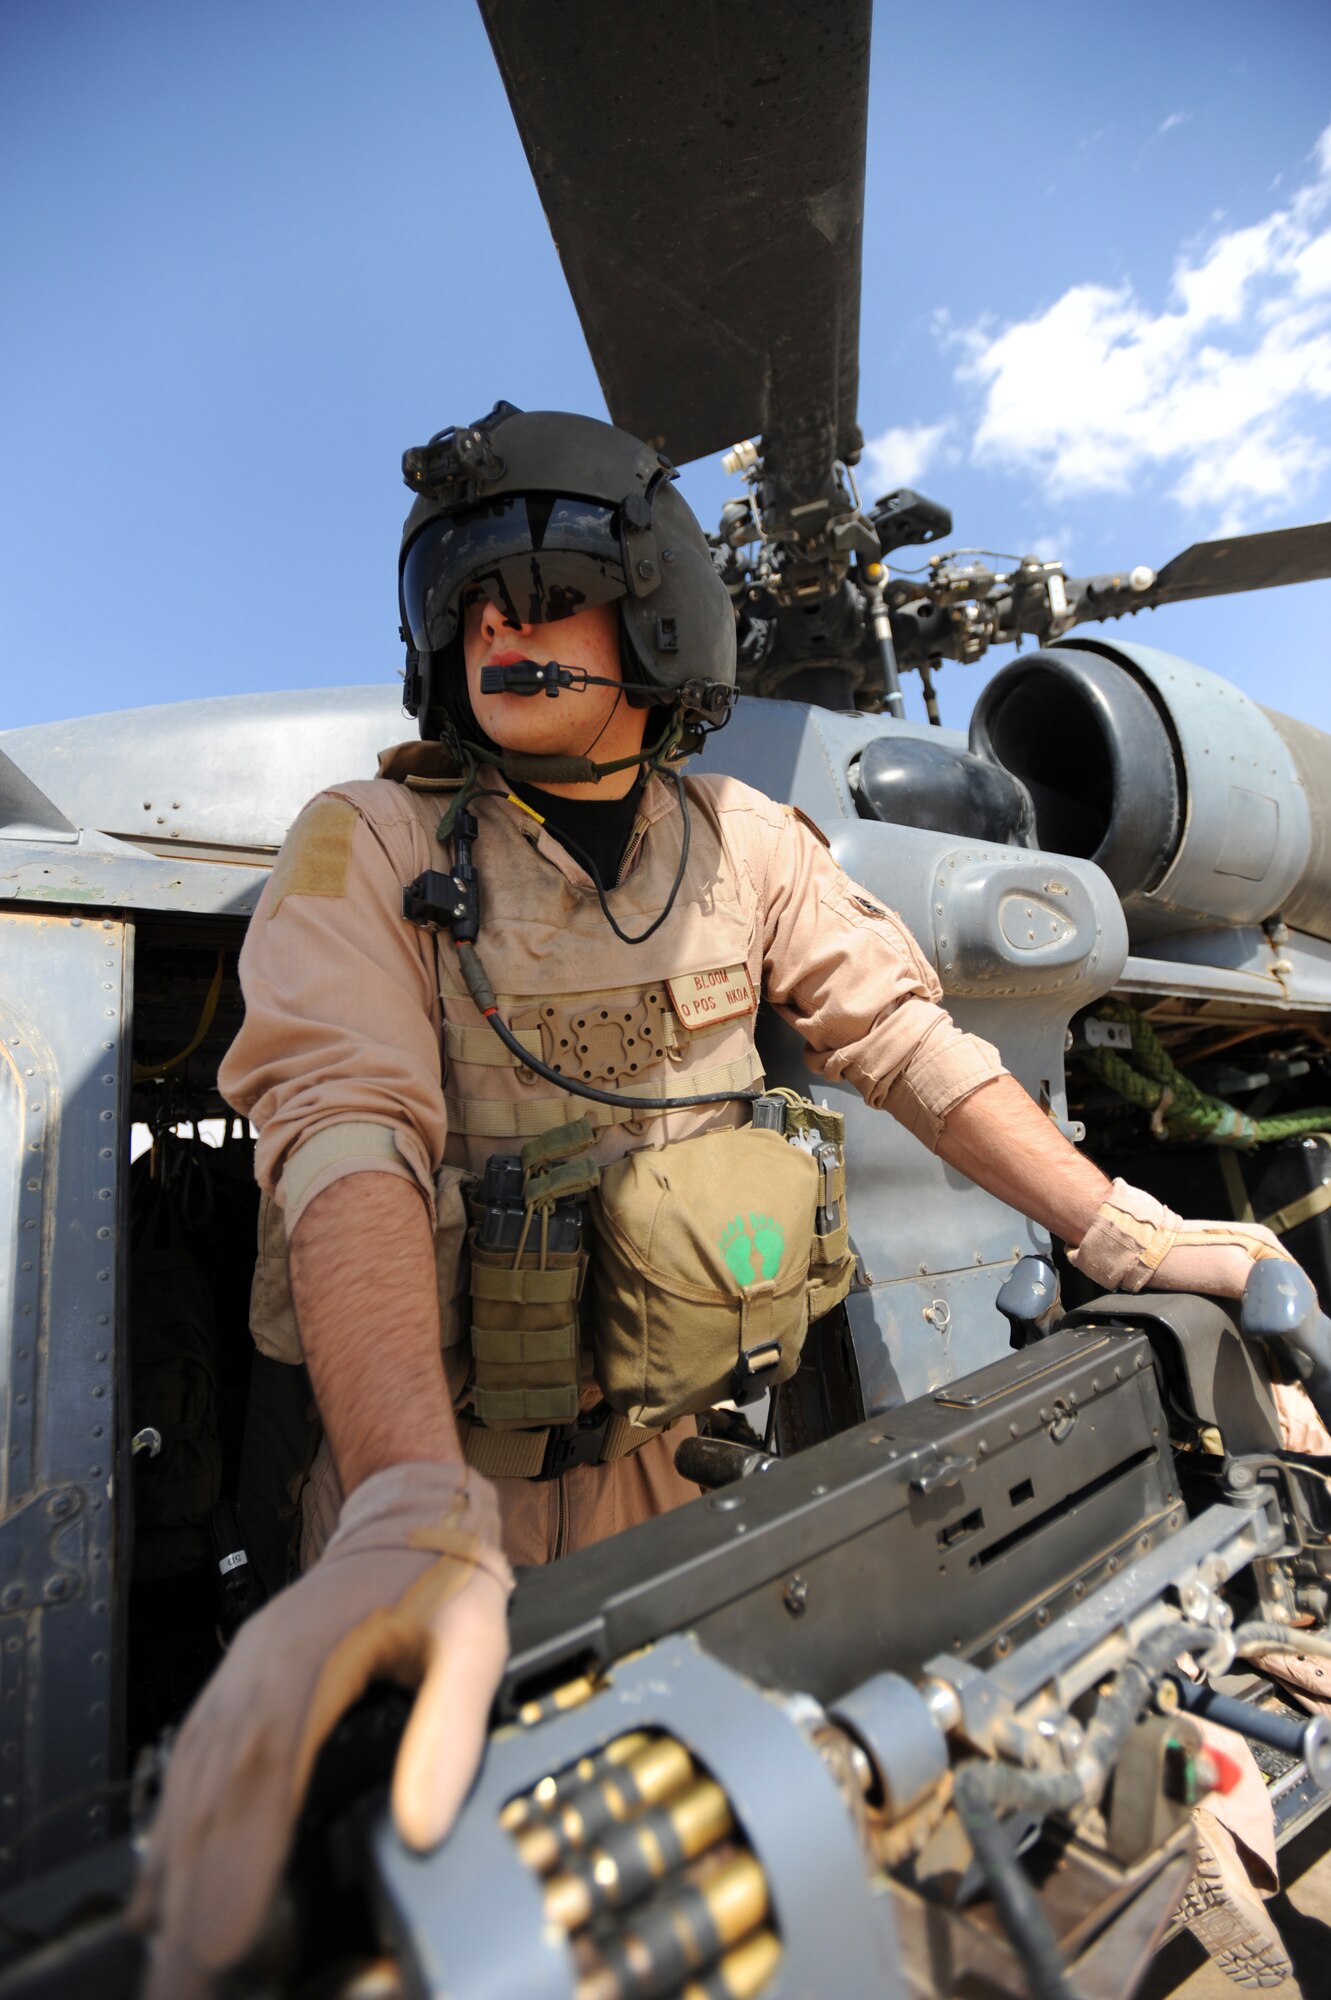 U.S. Air Force HH-60 Pavehawk helicopter gunner Staff Sgt. Derrick Bloom, 64th Expeditionary Rescue Squadron, Joint Base Balad, Iraq, stands by for engine startup prior to a proficiency exercise outside of Baghdad, Iraq, April 10, 2009, in support of Operation Iraqi Freedom.  (U.S. Air Force photo by Staff Sgt. James L. Harper Jr.)